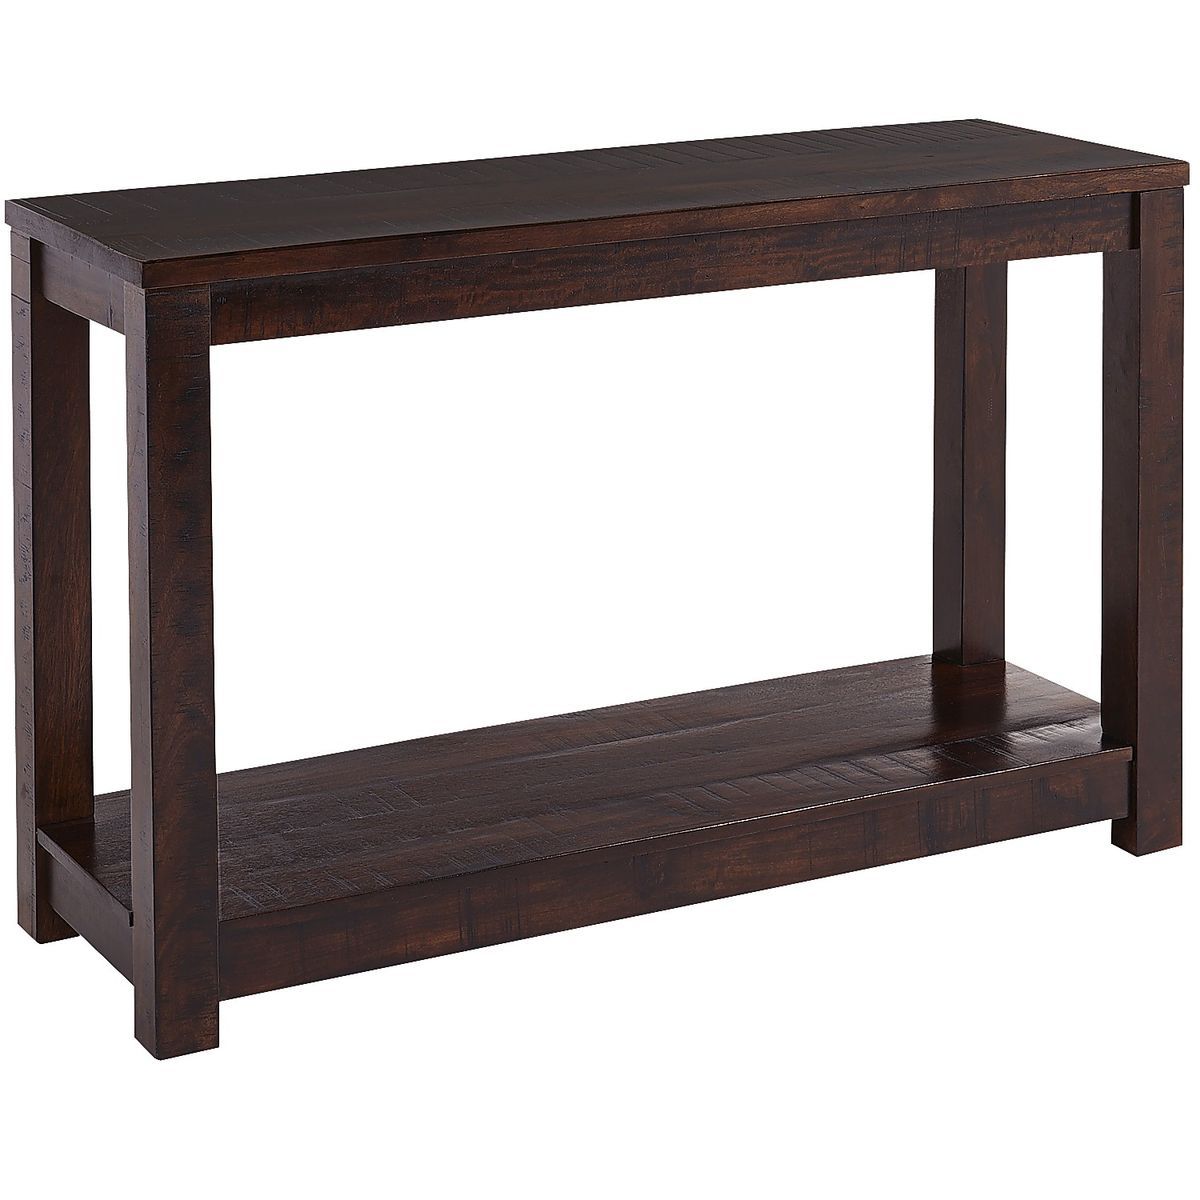 Parsons Tobacco Brown Console Table | Costa Rican Furniture Throughout Brown Wood And Steel Plate Console Tables (View 15 of 20)